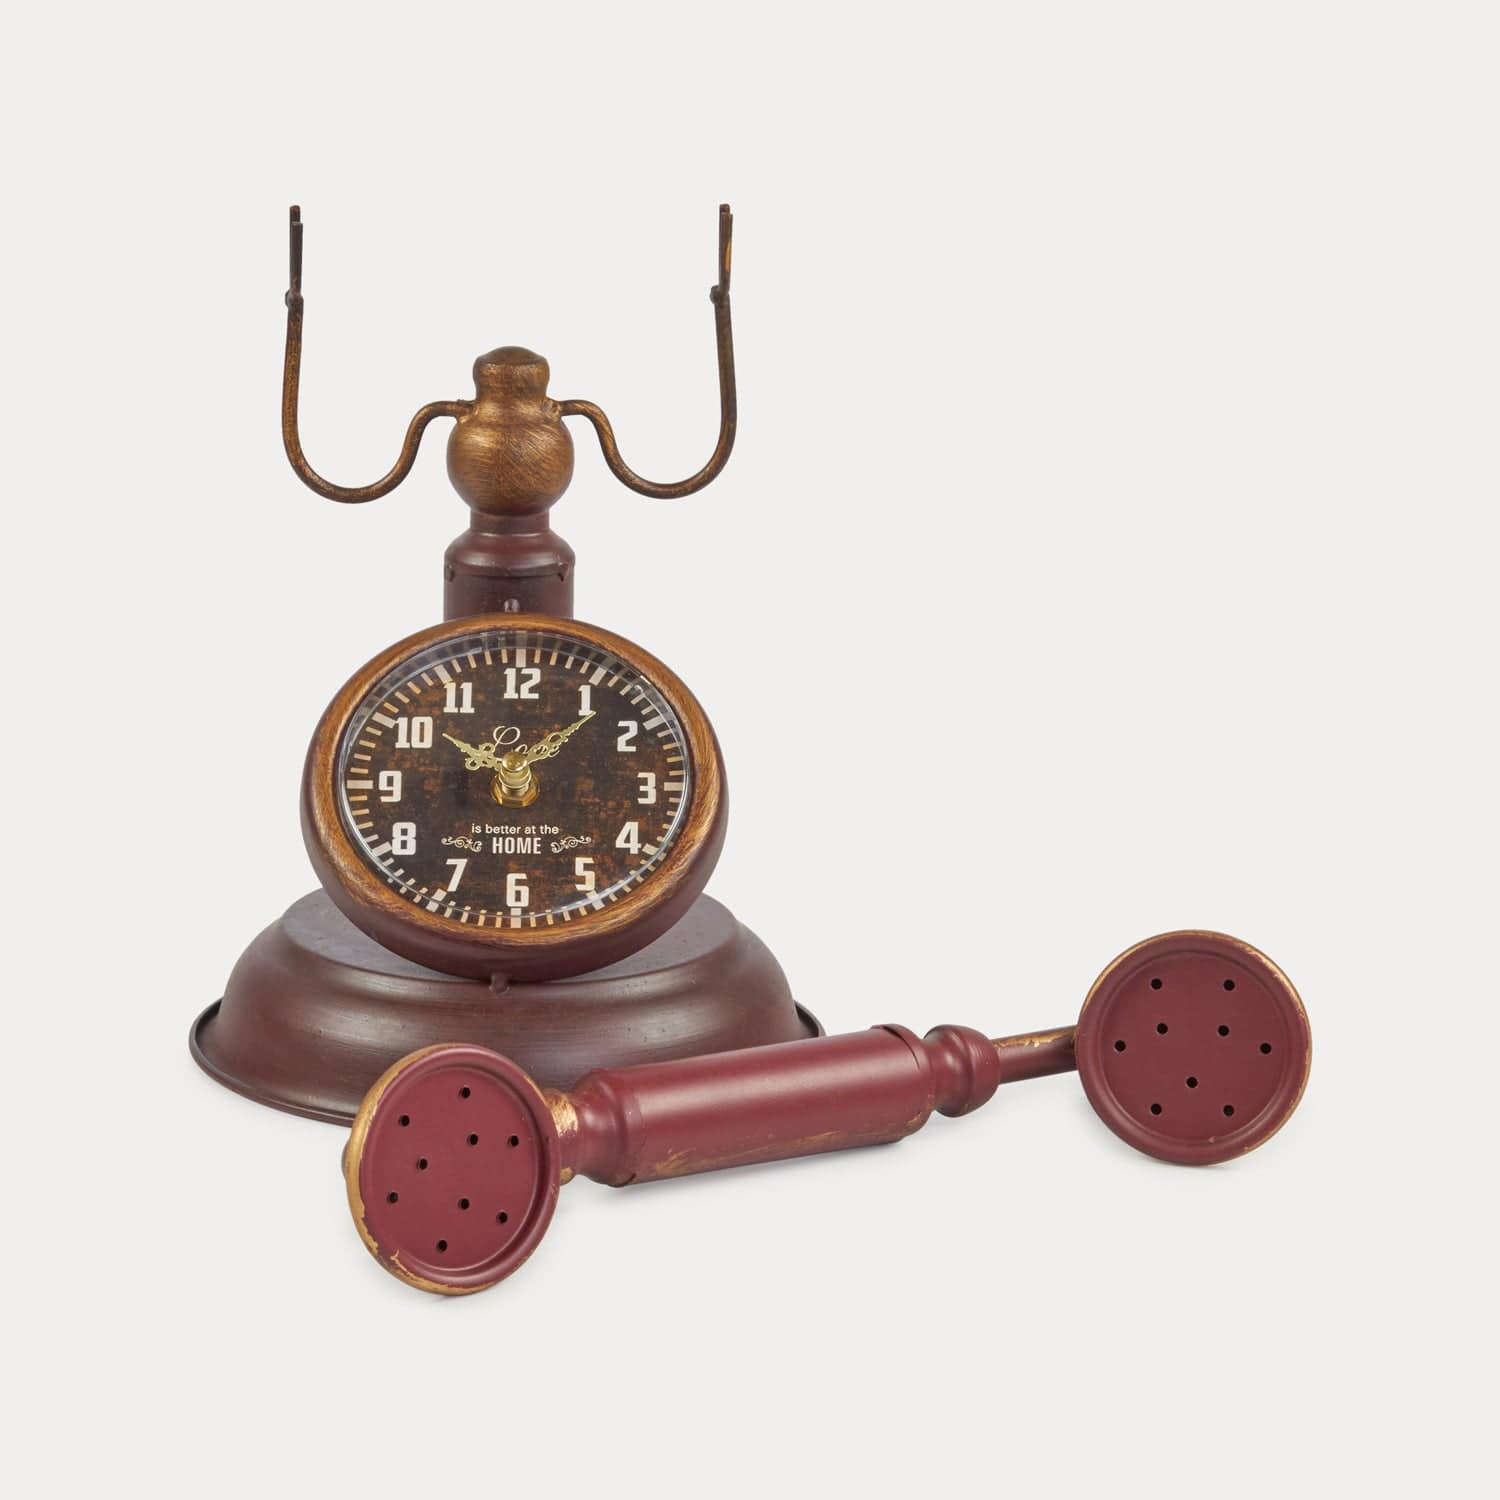 Red Butler Clock Telephone Clock DTTC00M10Y19A1 TTC10A1 Metal Telephone Clock – Unique Table Clock with Vintage Charm Redbutler